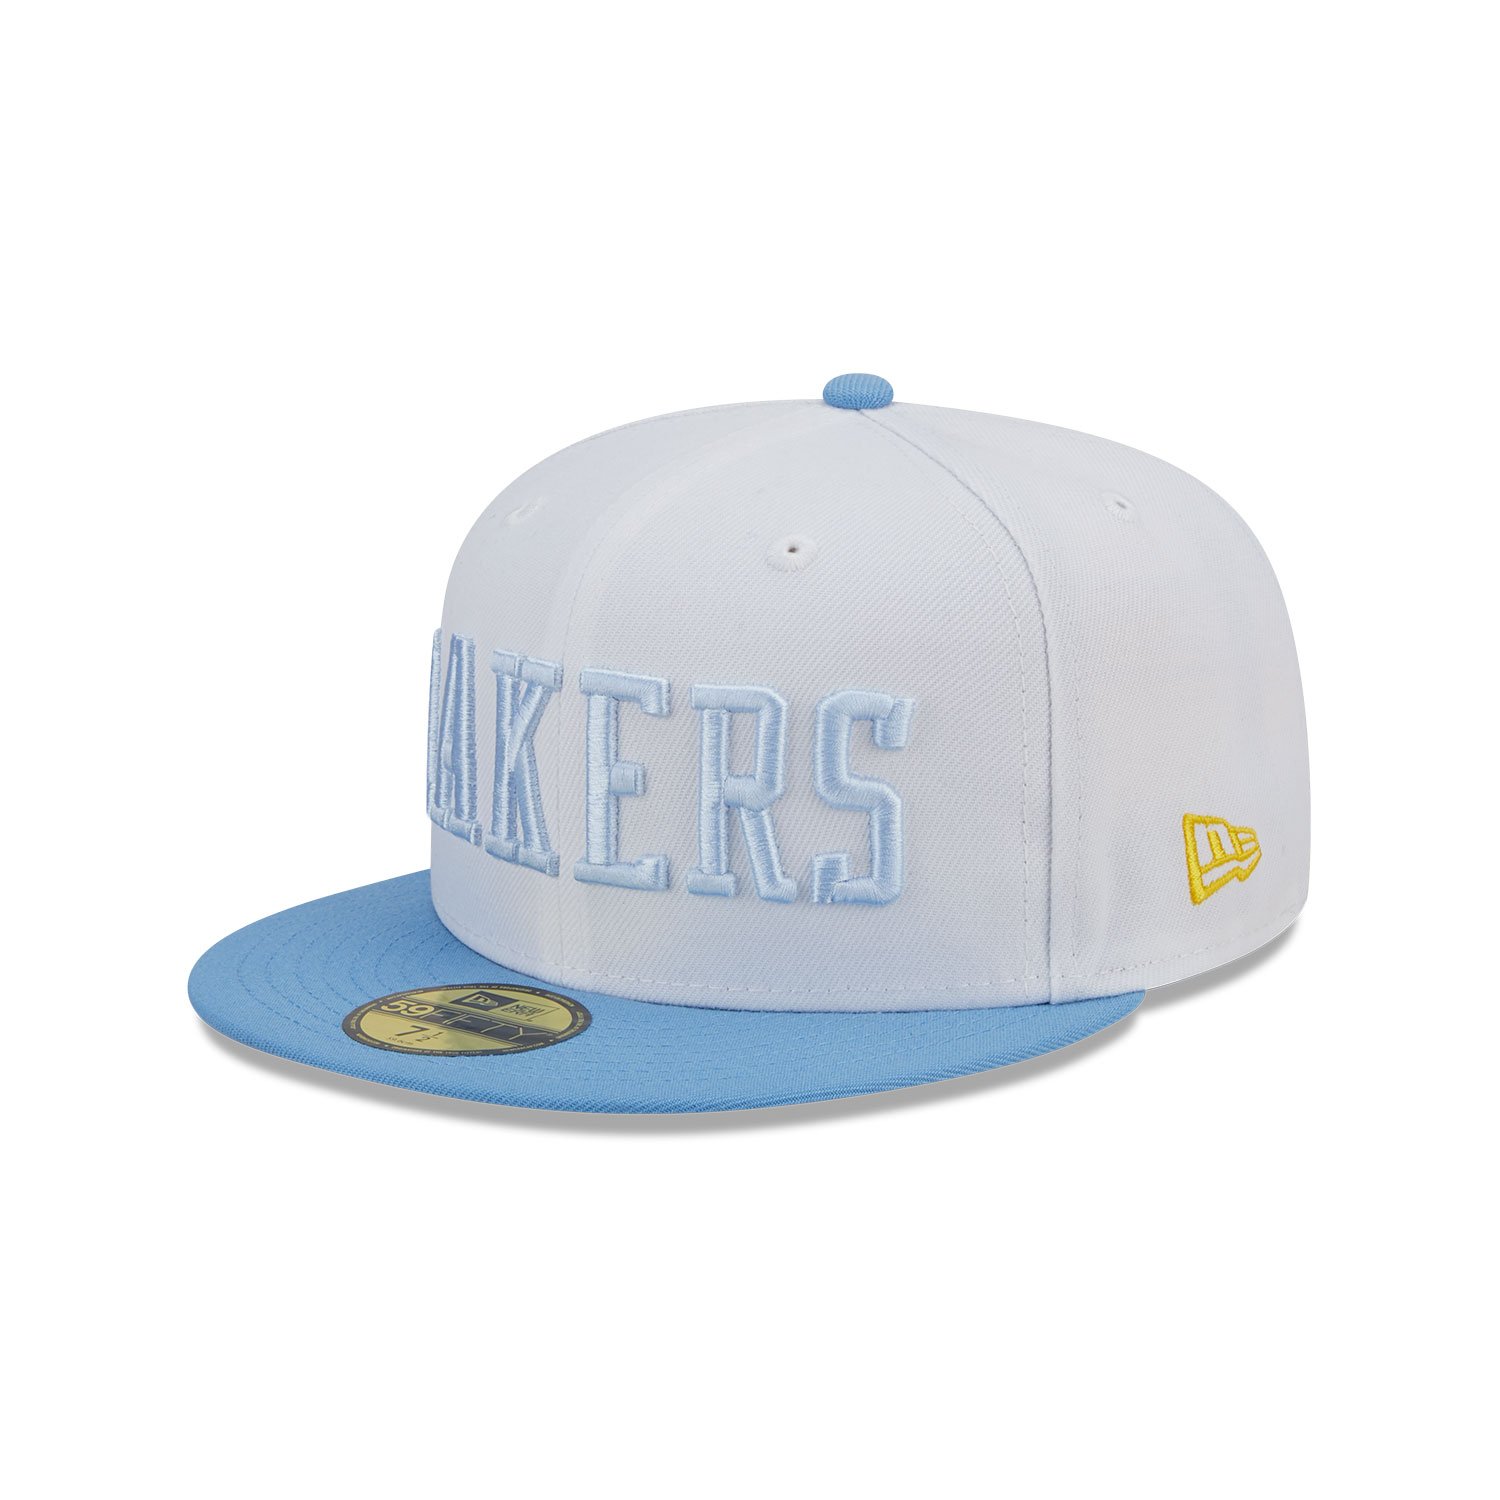 LA Lakers NBA Classic White 59FIFTY Fitted Cap